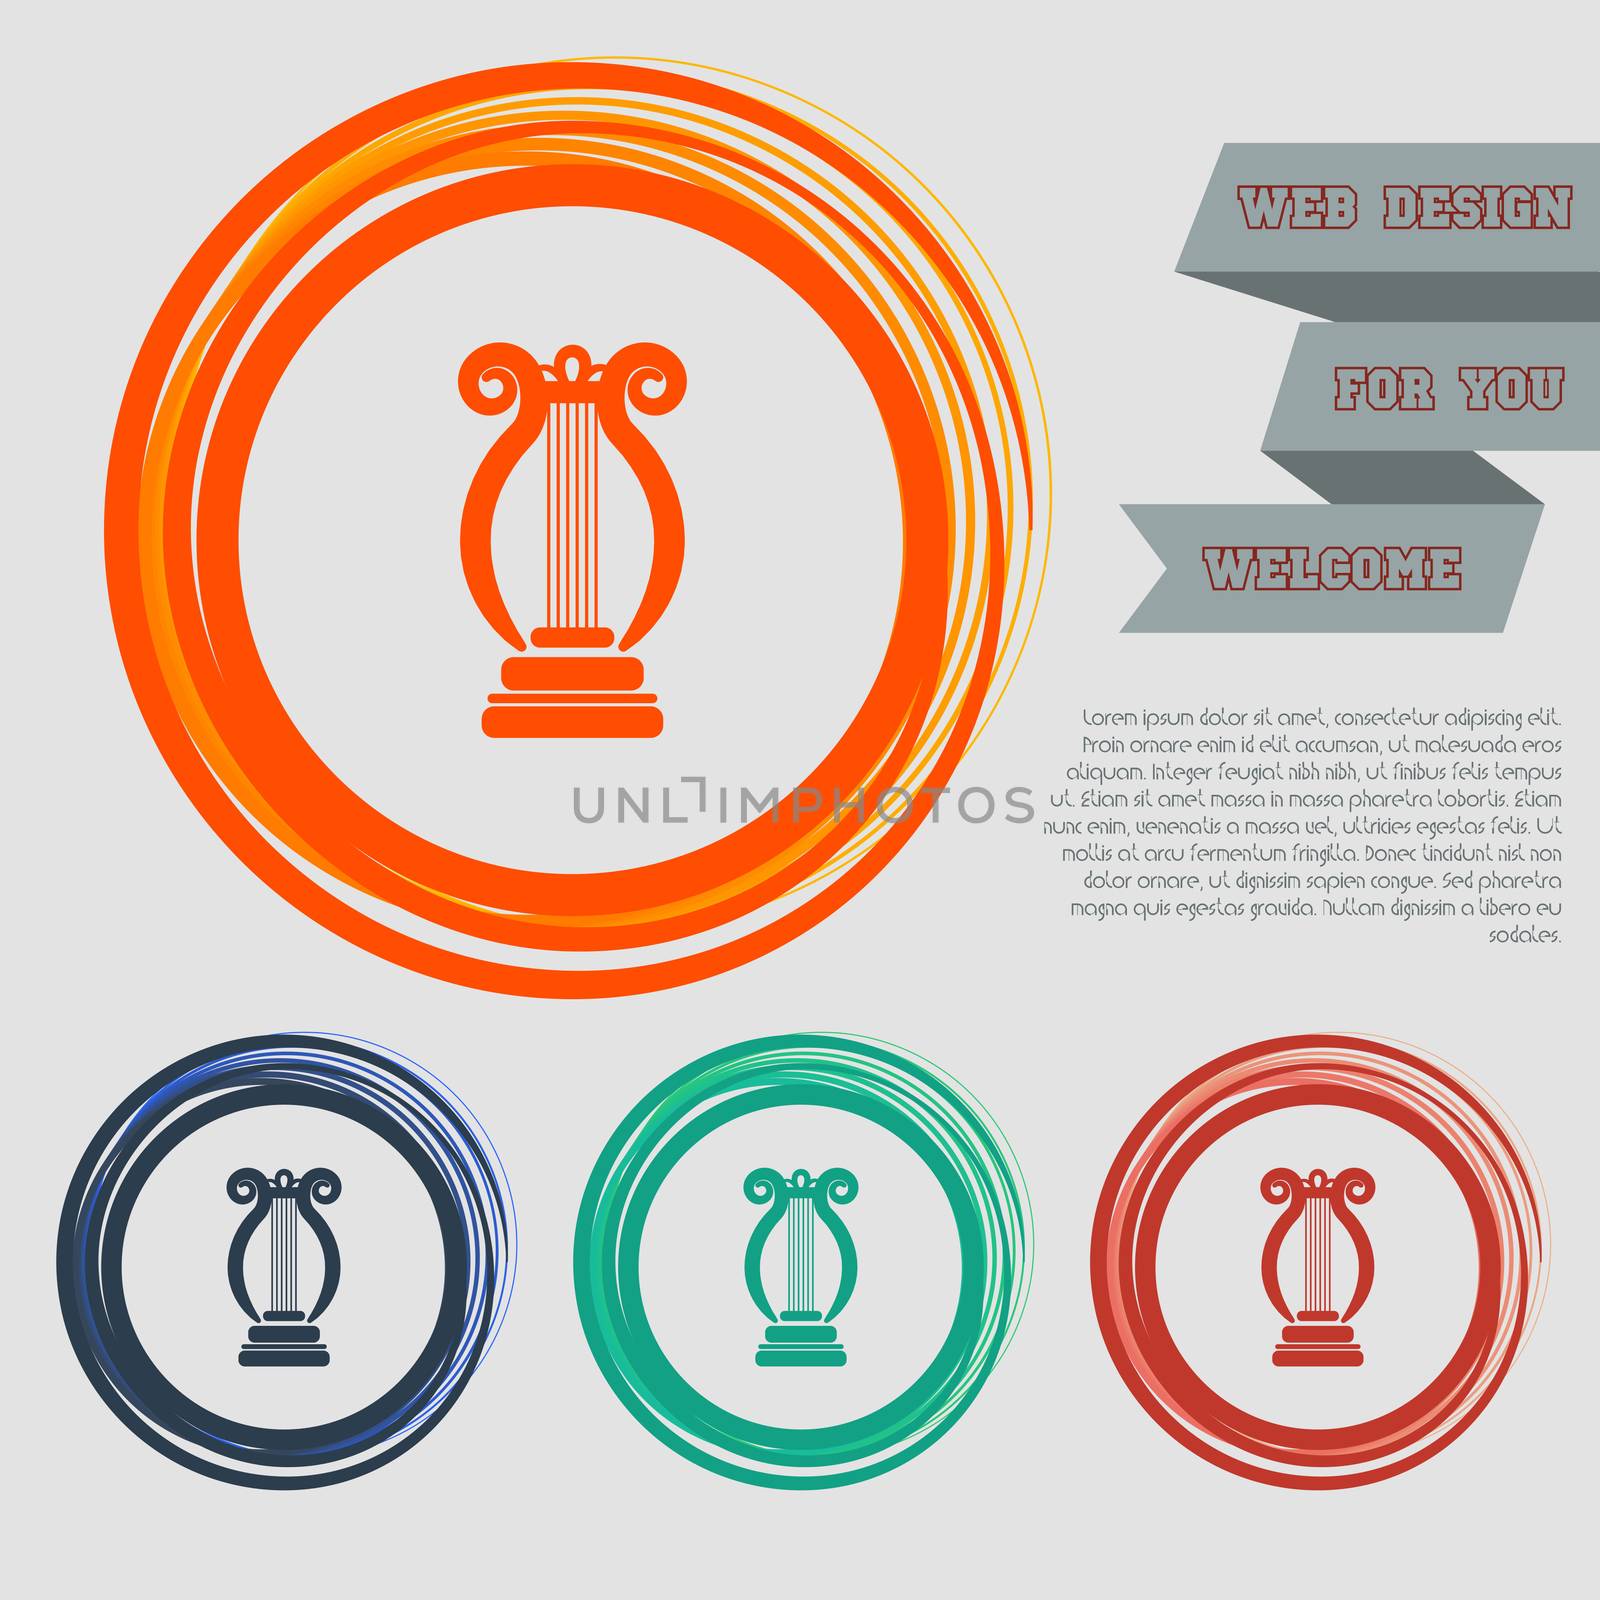 harp icon on the red, blue, green, orange buttons for your website and design with space text.  by Adamchuk